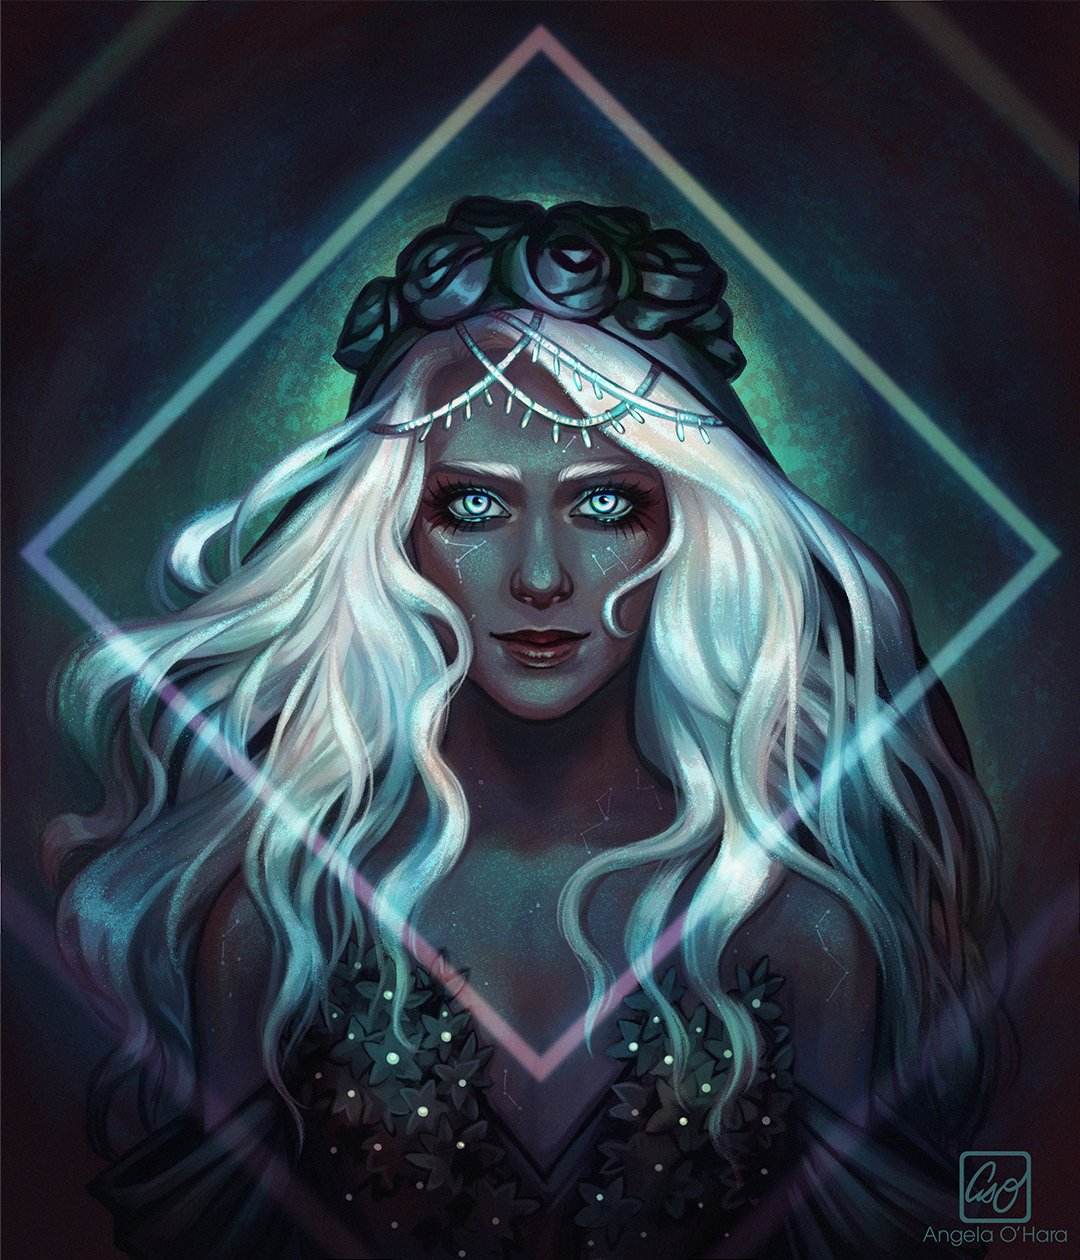 Angela O'Hara en Twitter: The Goddess Nyx, an art trade with Please check out her Kickstarter for the Celestial Goddesses artbook that launched today!